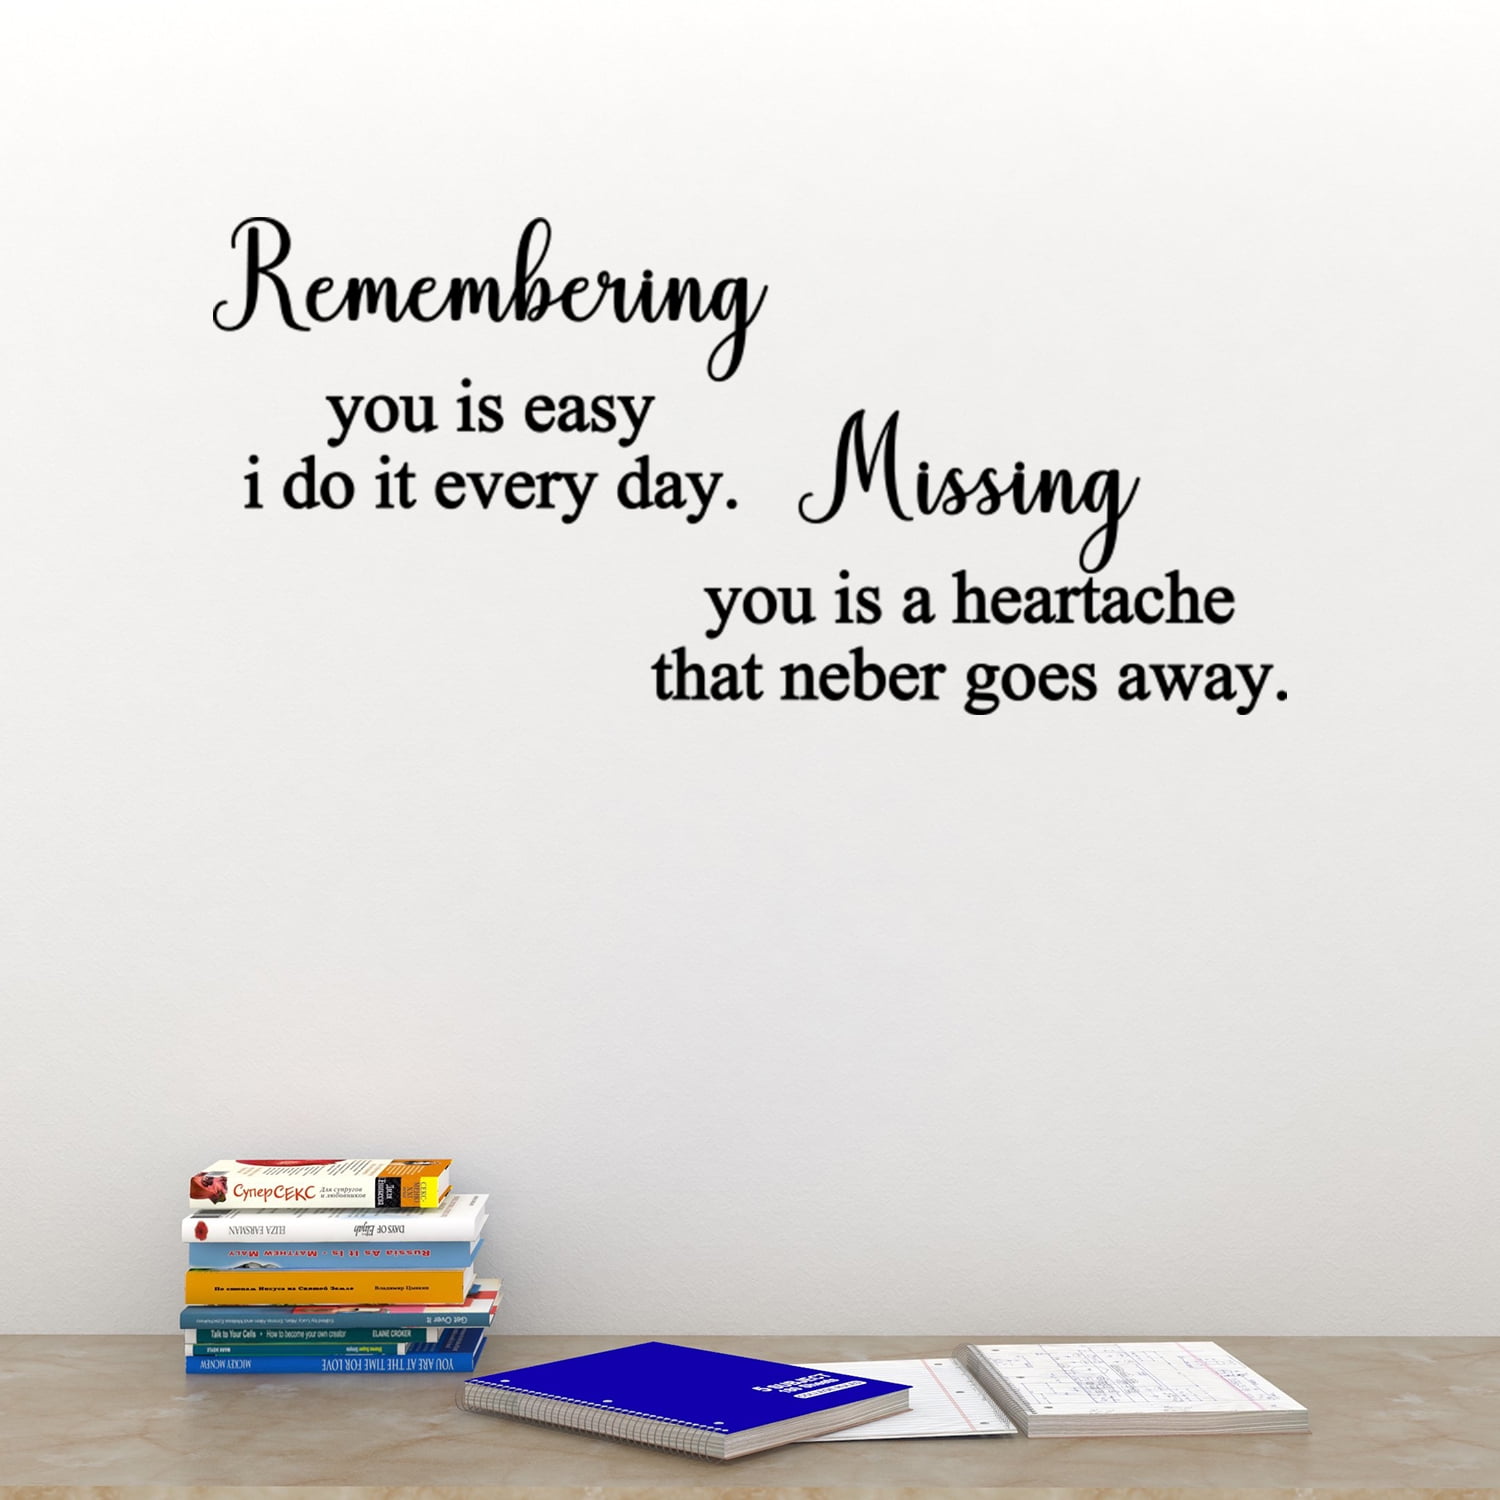 Dad Remembering you is easy I do it Everyday missing you is the heartache that never goes away svg eps png dxf jpeg jpg digital cutting file